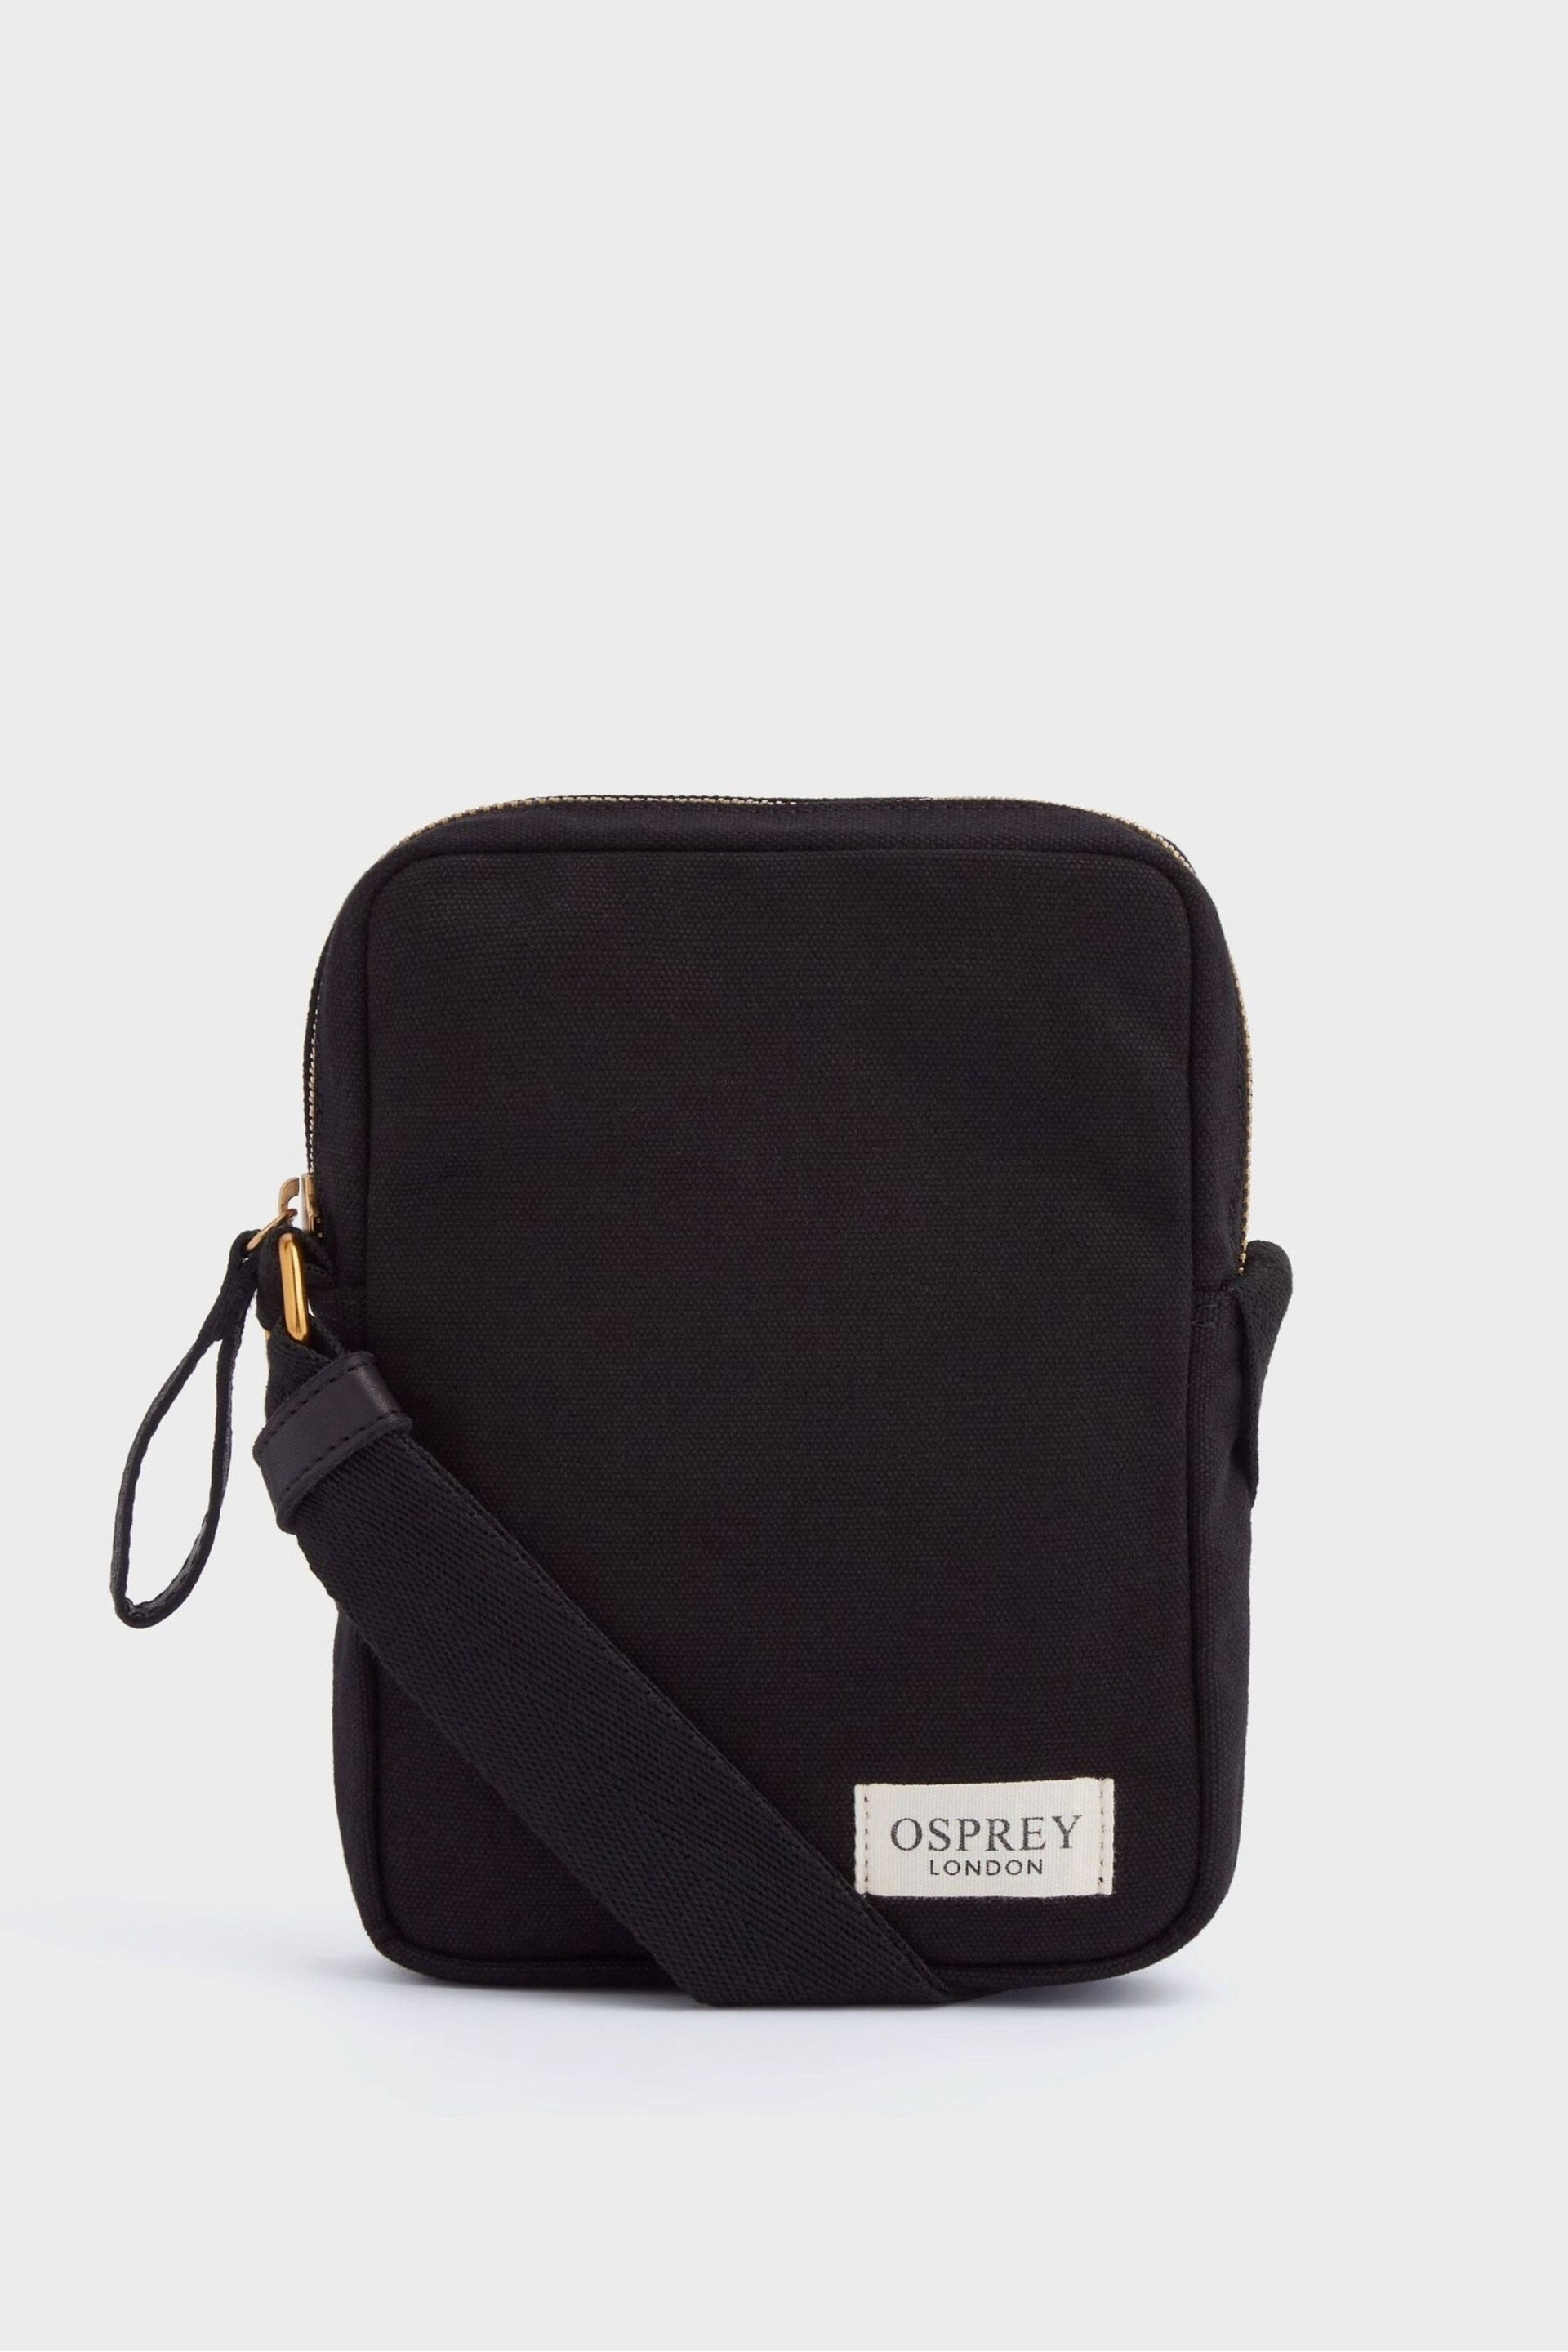 OSPREY LONDON The Studio Packable Phone Bag - Image 2 of 7